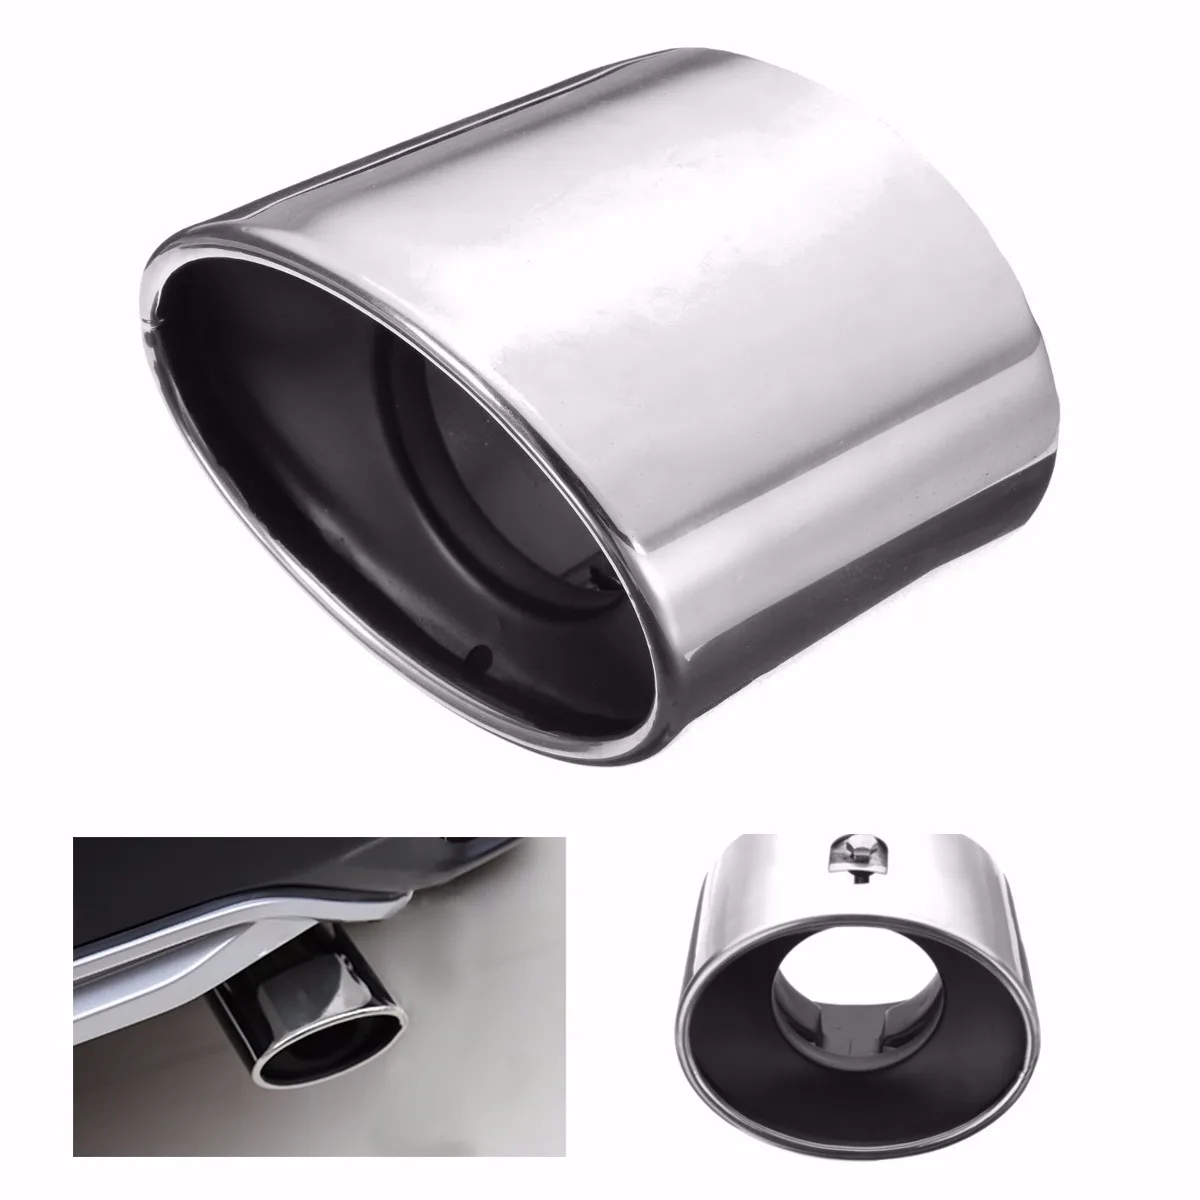 Chrome Stainless Steel Exhaust Tip Tail Pipe Muffler For Honda /Accord 2008-2012